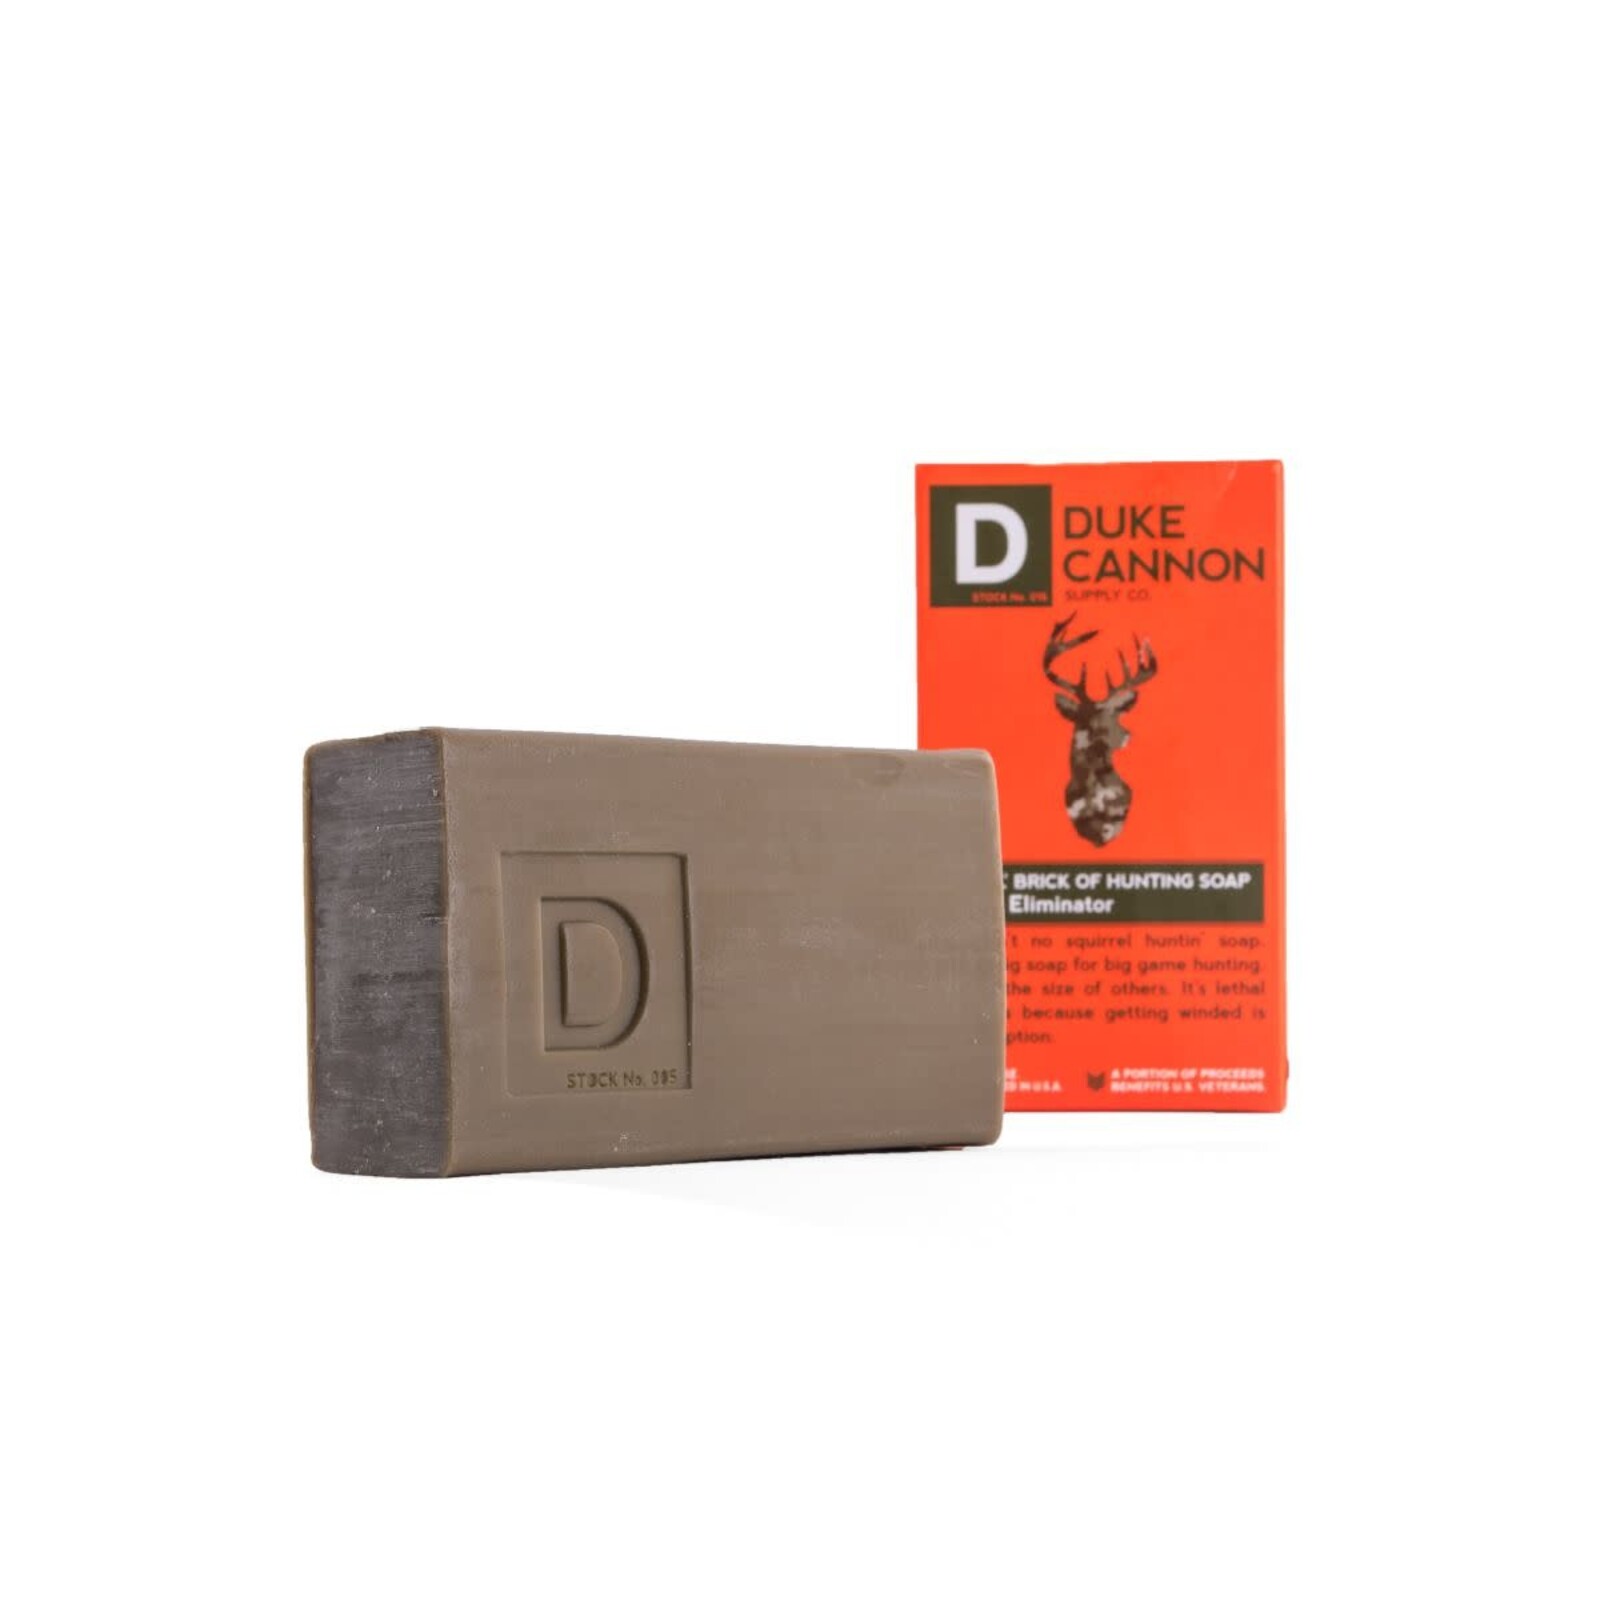 Duke Cannon Big Ol Brick of Hunting Soap (unscented)  Hunting1 loading=